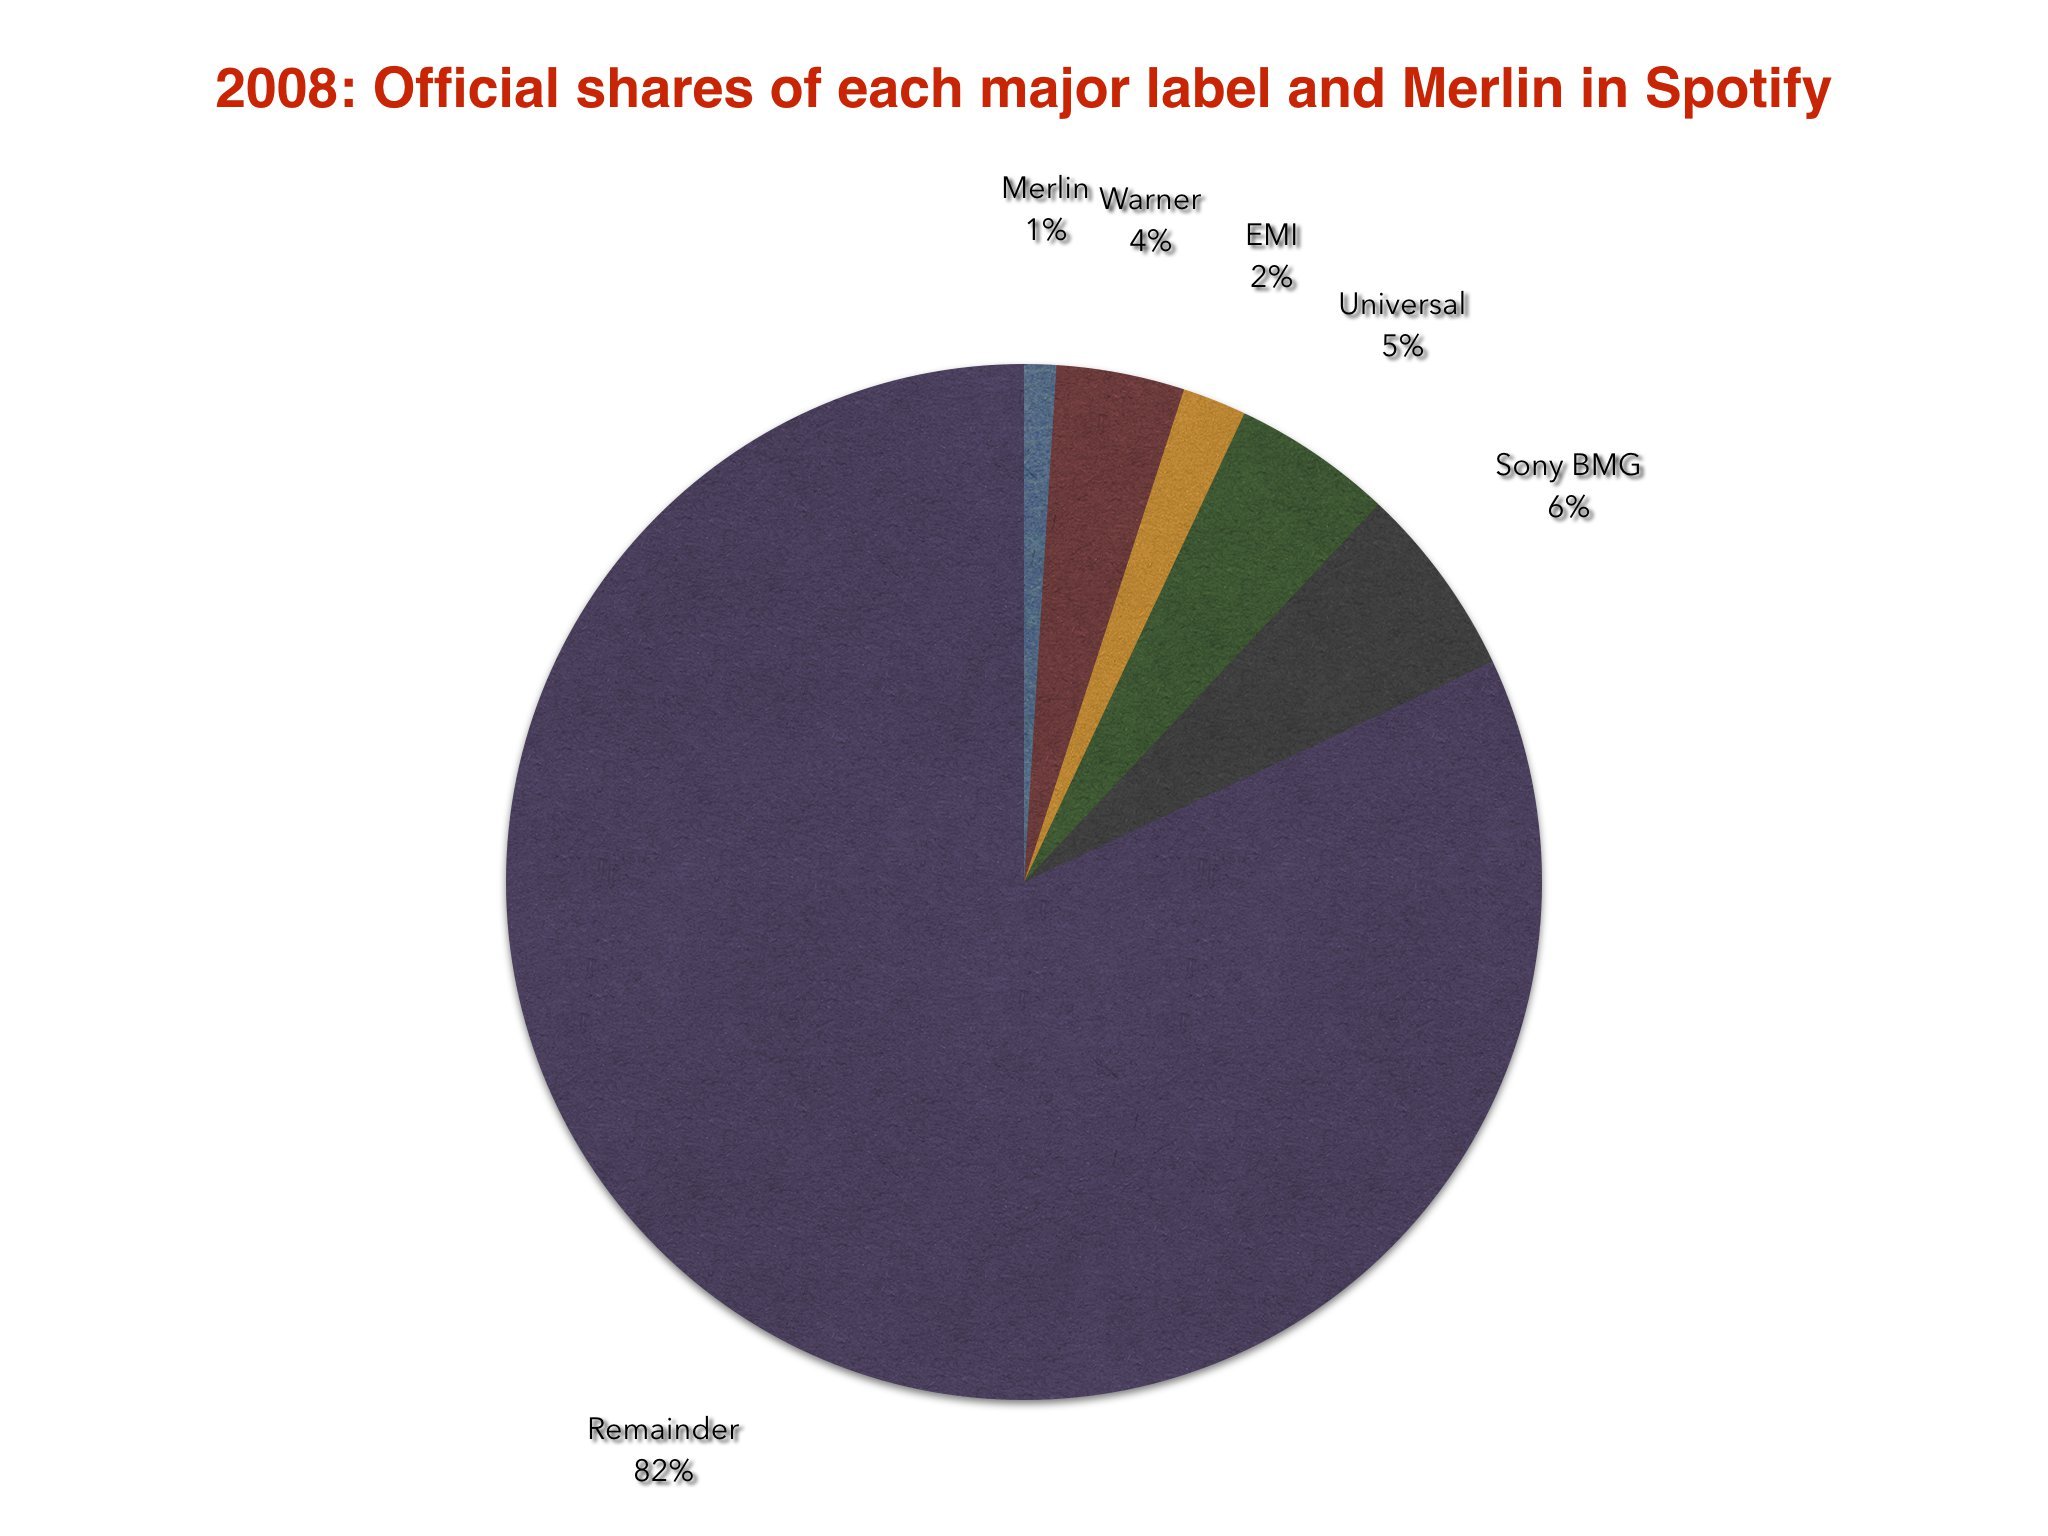 Here's exactly how many shares the major labels and Merlin bought